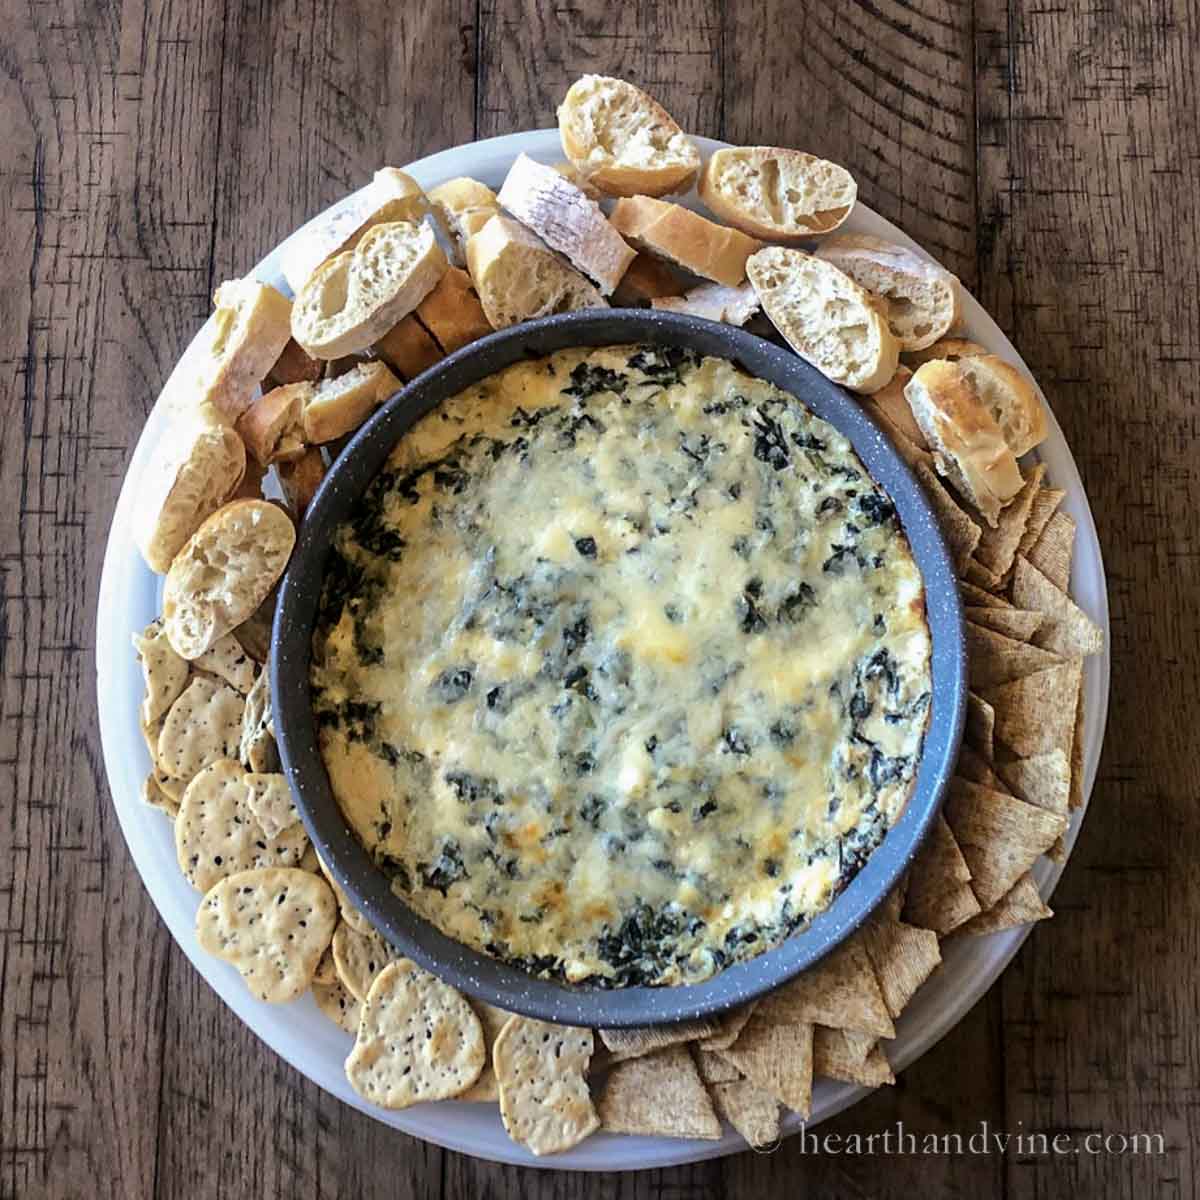 Spinach dip with cream cheese on a platter with crackers and slice baguette bread rounds.